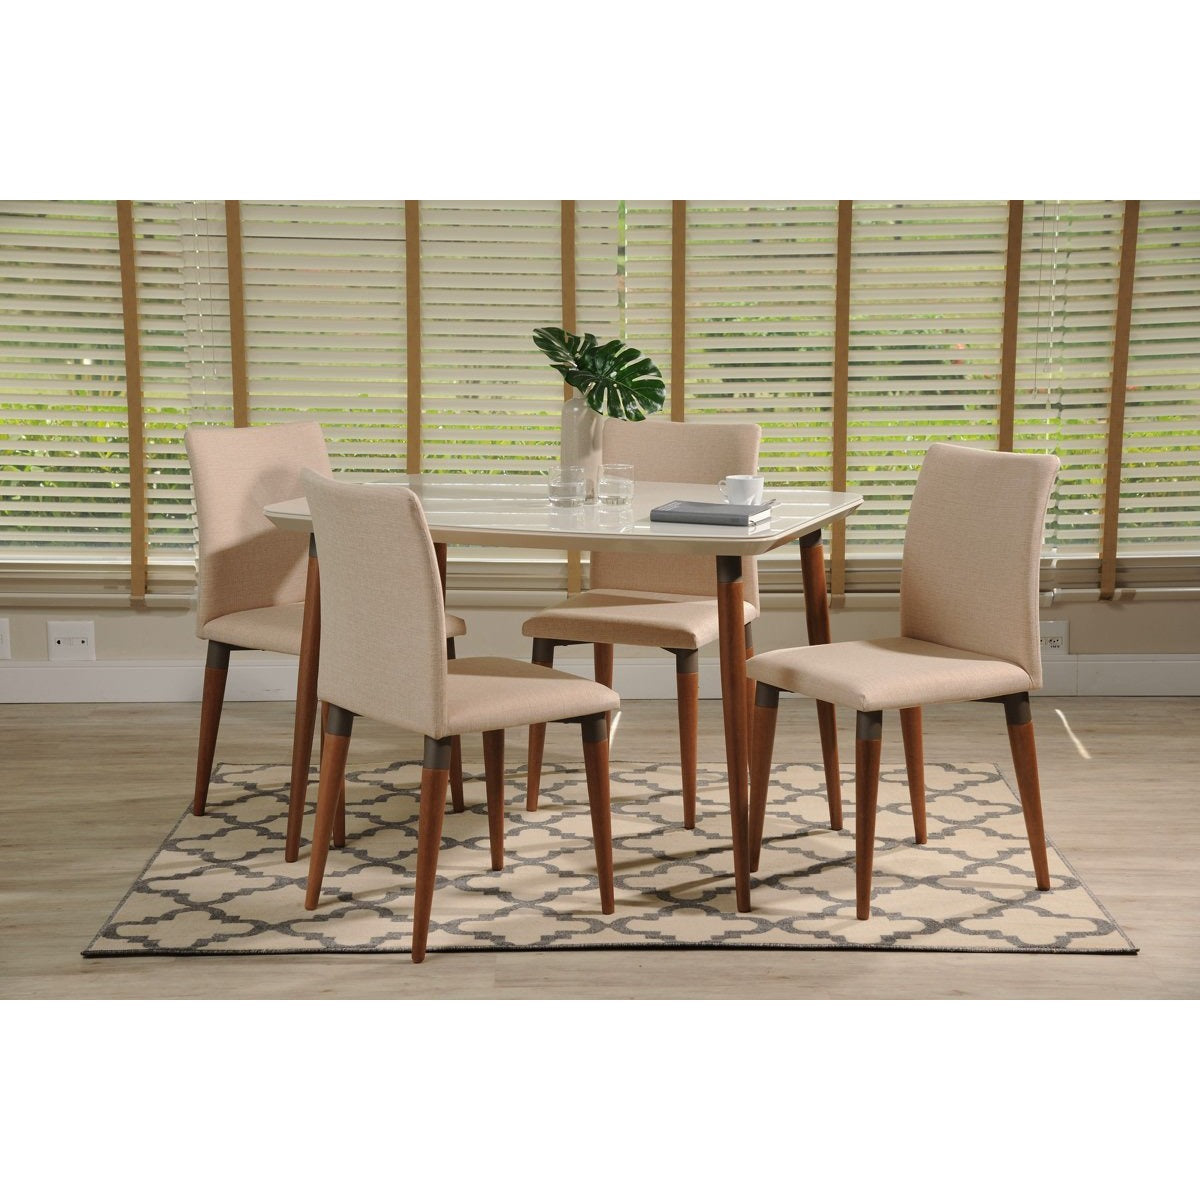 Manhattan Comfort 5-Piece Charles 45.27" Dining Set with 4 Dining Chairs in Off White and Dark Beige-Minimal & Modern